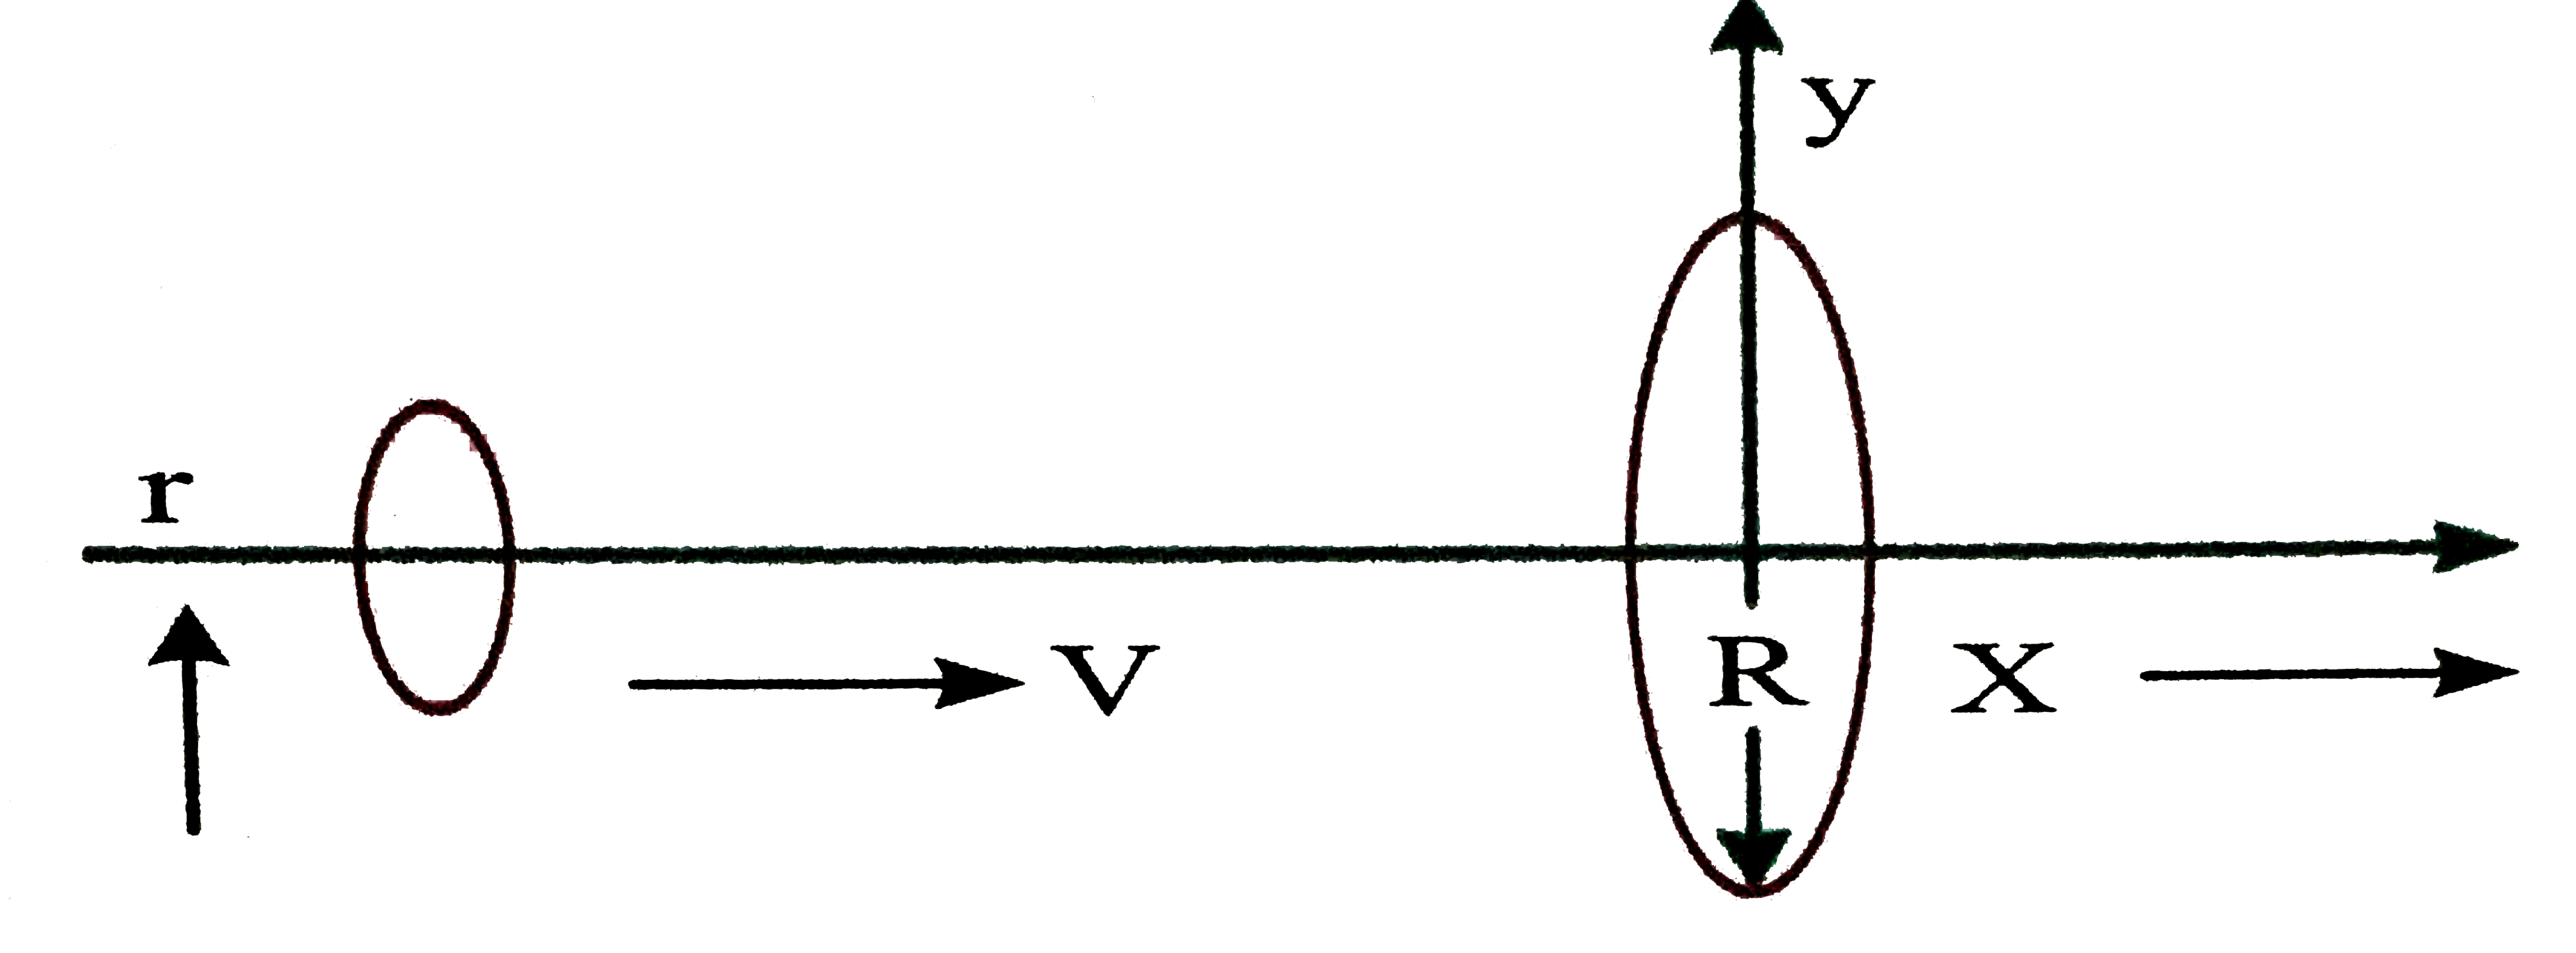 A ring of radius R is placed in the plane with its centre at origin and its axis along the x-axis and having uniformly distributed positive charge.A ring of radius r( ltlt R) and coaxial with the larger ring is moving along the axis with constant velocity then the variation of electrical flux (phi) passing through the smaller ring with position will be best represented by :